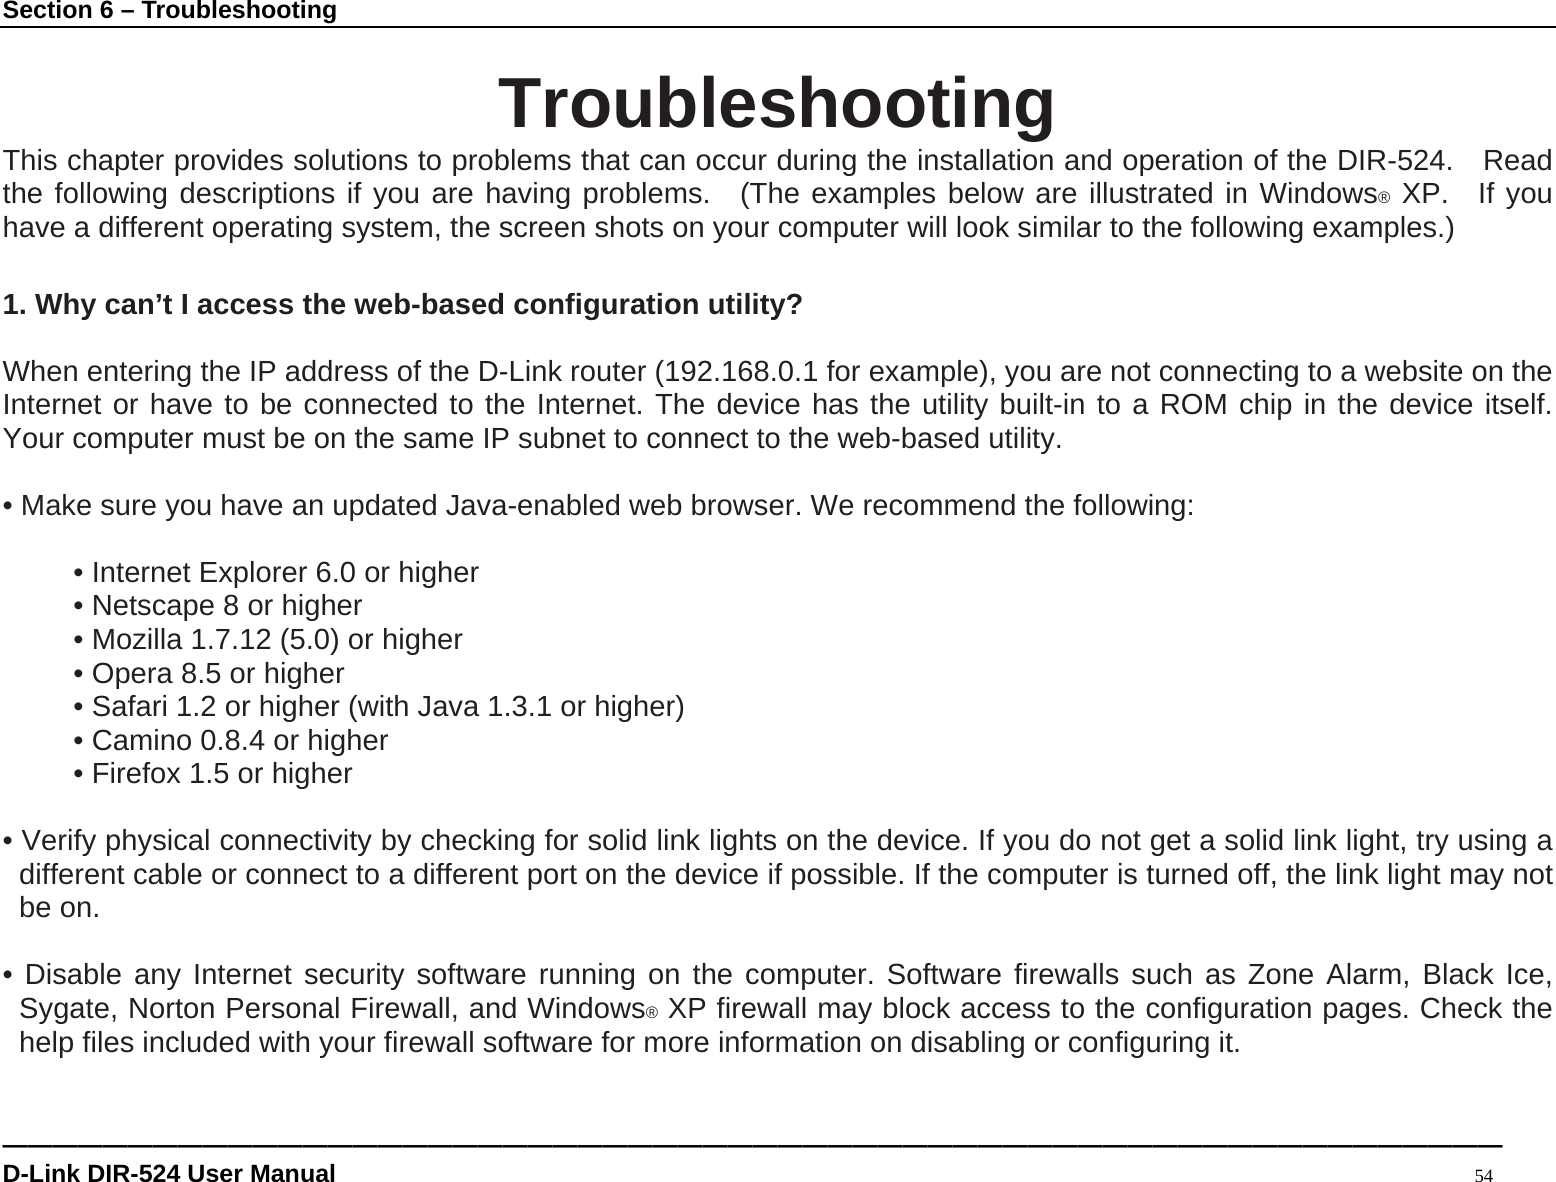 Section 6 – Troubleshooting ———————————————————————————————————————————————————————————— D-Link DIR-524 User Manual                                                                                           54  Troubleshooting This chapter provides solutions to problems that can occur during the installation and operation of the DIR-524.  Read the following descriptions if you are having problems.  (The examples below are illustrated in Windows® XP.  If you have a different operating system, the screen shots on your computer will look similar to the following examples.)  1. Why can’t I access the web-based configuration utility?  When entering the IP address of the D-Link router (192.168.0.1 for example), you are not connecting to a website on the Internet or have to be connected to the Internet. The device has the utility built-in to a ROM chip in the device itself. Your computer must be on the same IP subnet to connect to the web-based utility.    • Make sure you have an updated Java-enabled web browser. We recommend the following:    • Internet Explorer 6.0 or higher   • Netscape 8 or higher   • Mozilla 1.7.12 (5.0) or higher   • Opera 8.5 or higher   • Safari 1.2 or higher (with Java 1.3.1 or higher)   • Camino 0.8.4 or higher   • Firefox 1.5 or higher    • Verify physical connectivity by checking for solid link lights on the device. If you do not get a solid link light, try using a different cable or connect to a different port on the device if possible. If the computer is turned off, the link light may not be on.  • Disable any Internet security software running on the computer. Software firewalls such as Zone Alarm, Black Ice, Sygate, Norton Personal Firewall, and Windows® XP firewall may block access to the configuration pages. Check the help files included with your firewall software for more information on disabling or configuring it.  